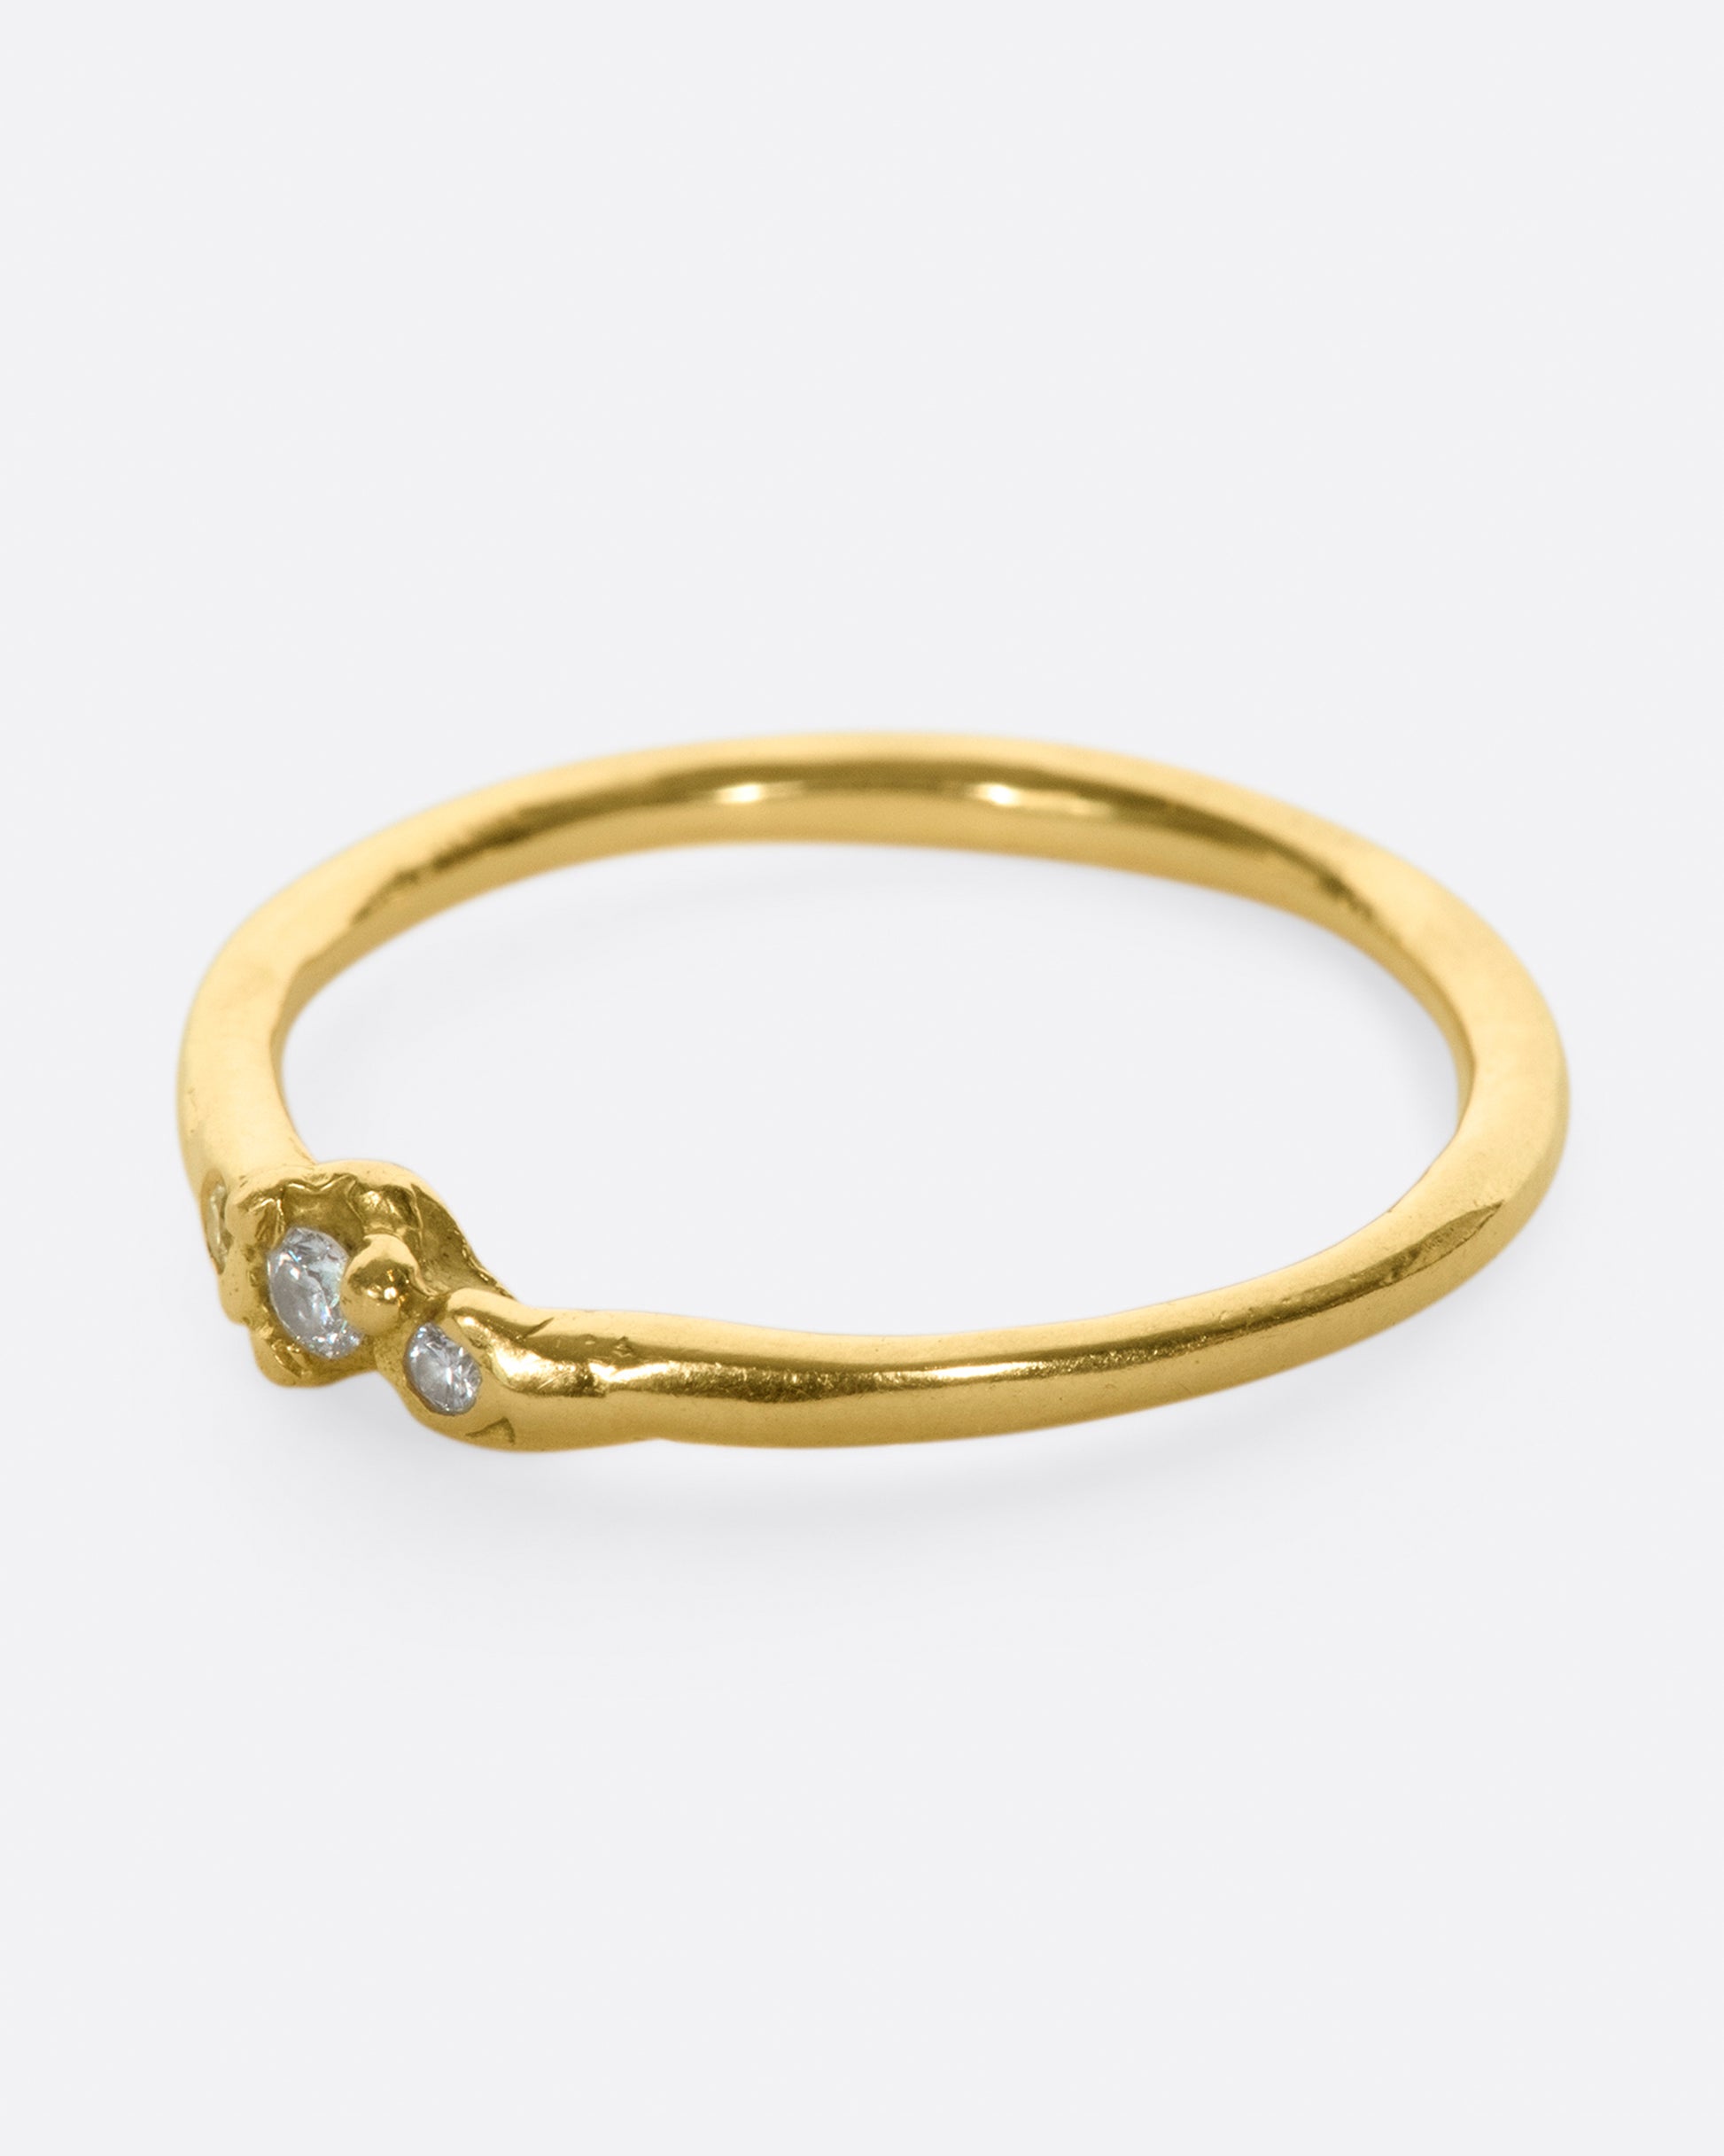 A simple band with a cluster of three diamonds